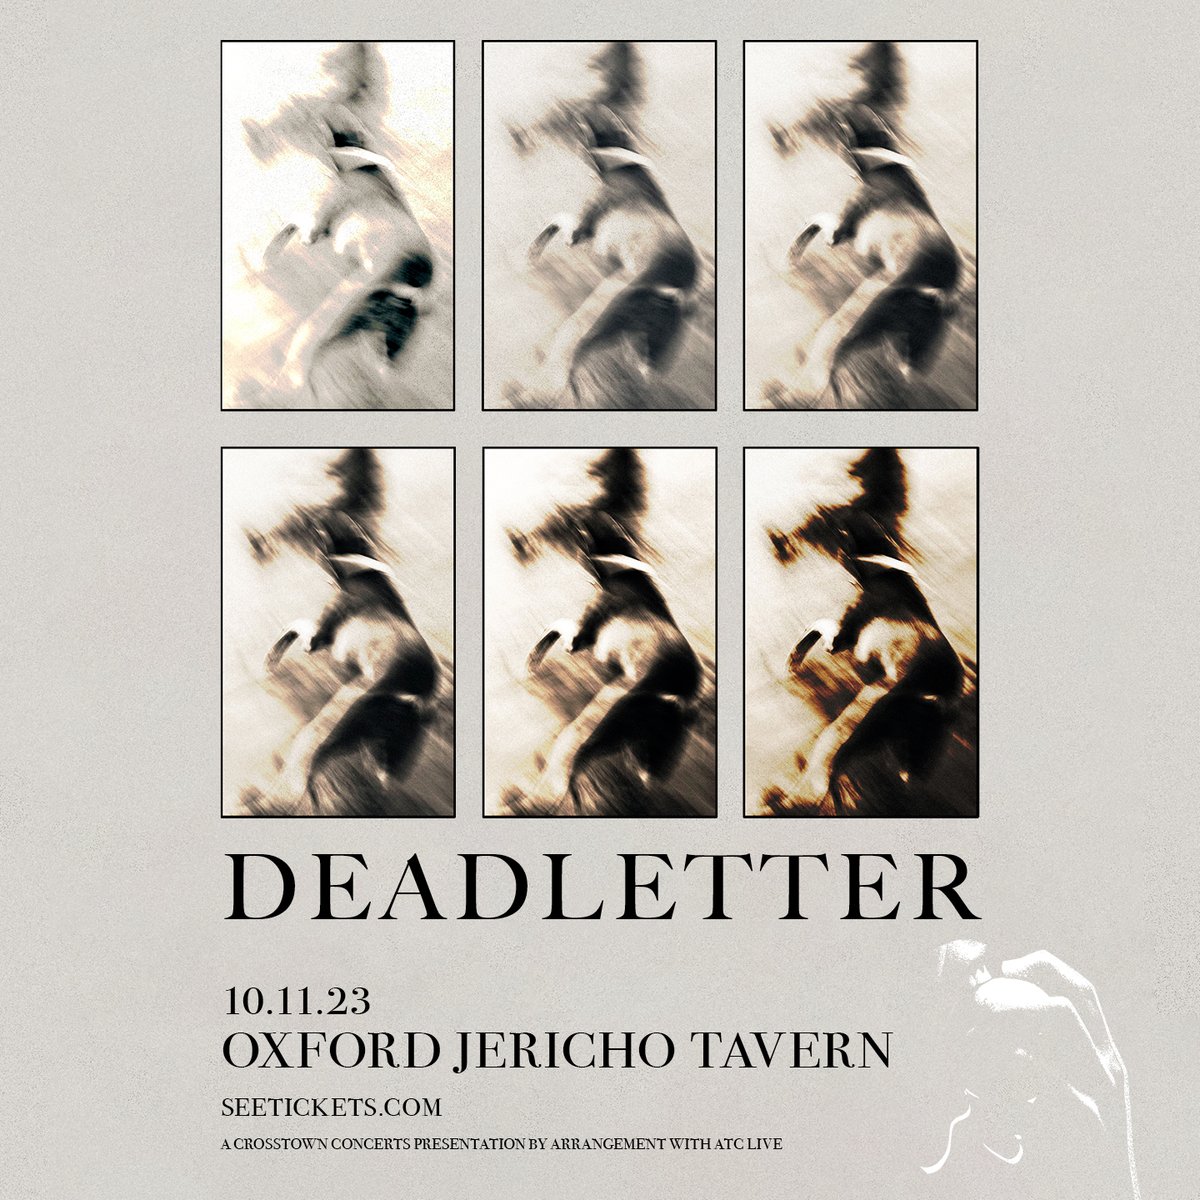 Tickets are now on sale for @_DEADLETTER @Jericho_Tavern in Oxford on Friday 10th October. Get yours here: crosstownconcerts.seetickets.com/event/deadlett…